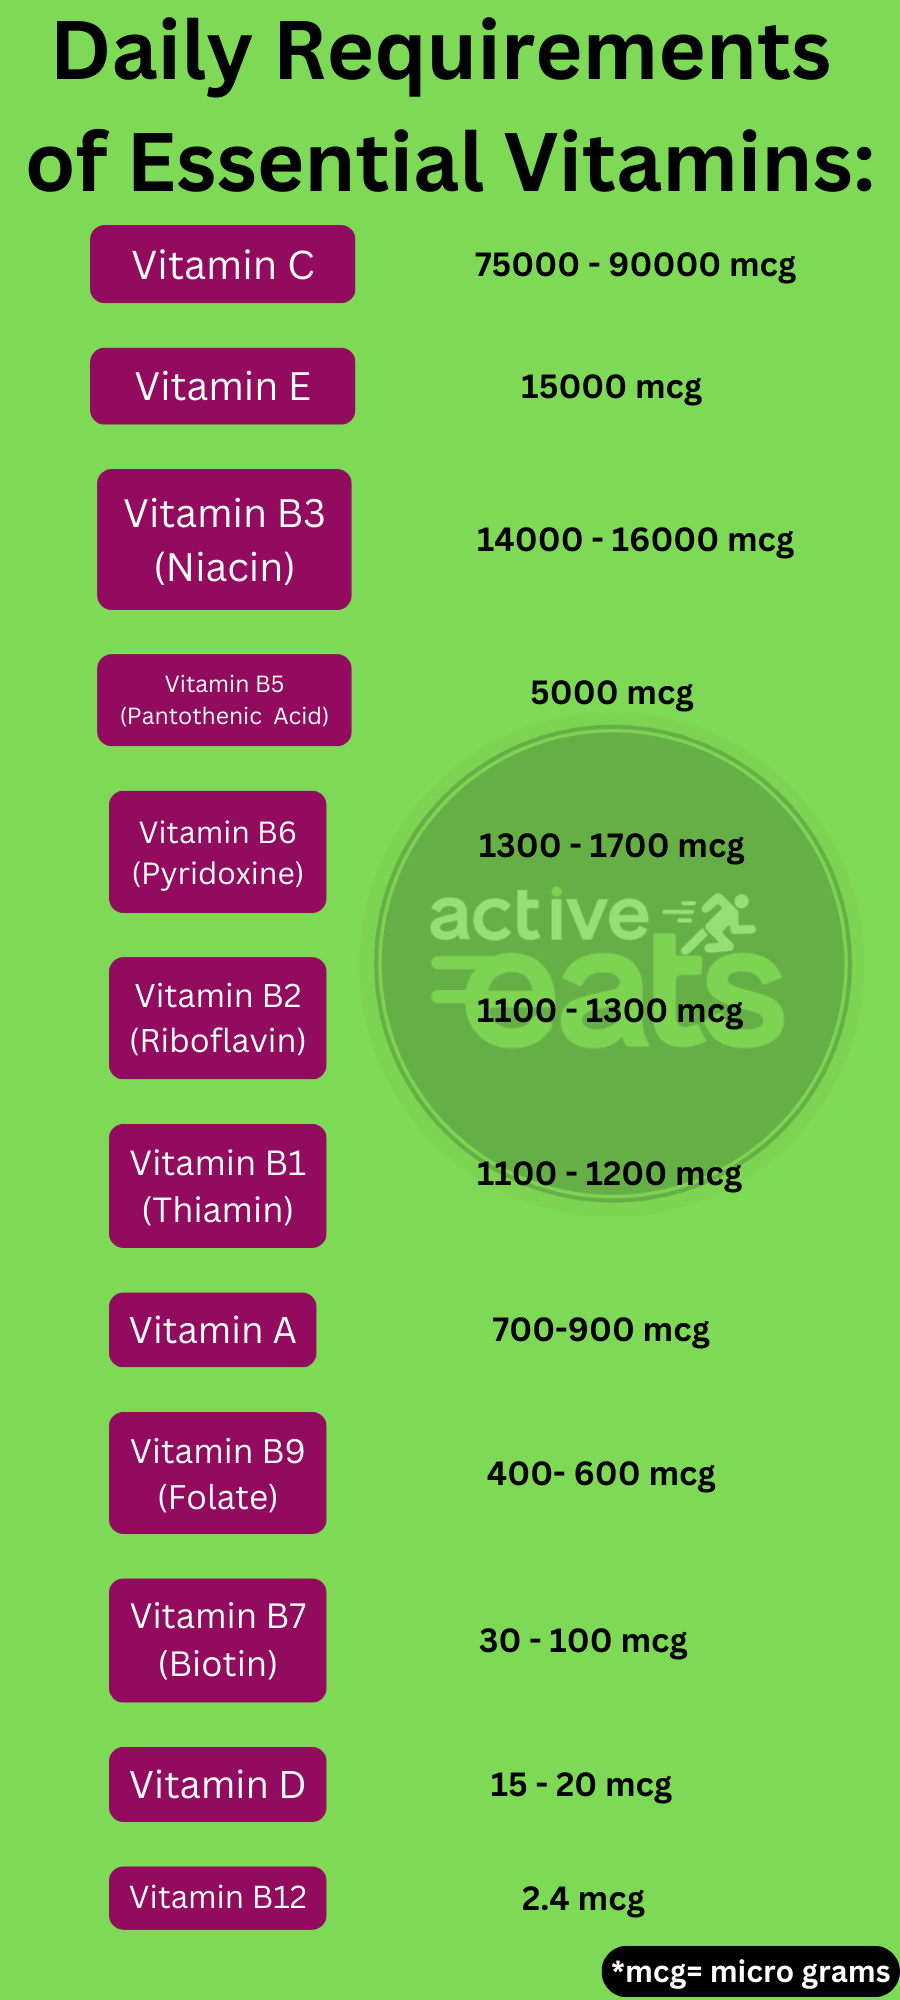 Daily vitamin requirements vary by age, gender, and life stage. For adults, approximate daily requirements include vitamin A (700-900 micrograms), vitamin C (65-90 milligrams), vitamin D (600-800 IU), vitamin E (15 milligrams), and vitamin K (90-120 micrograms).